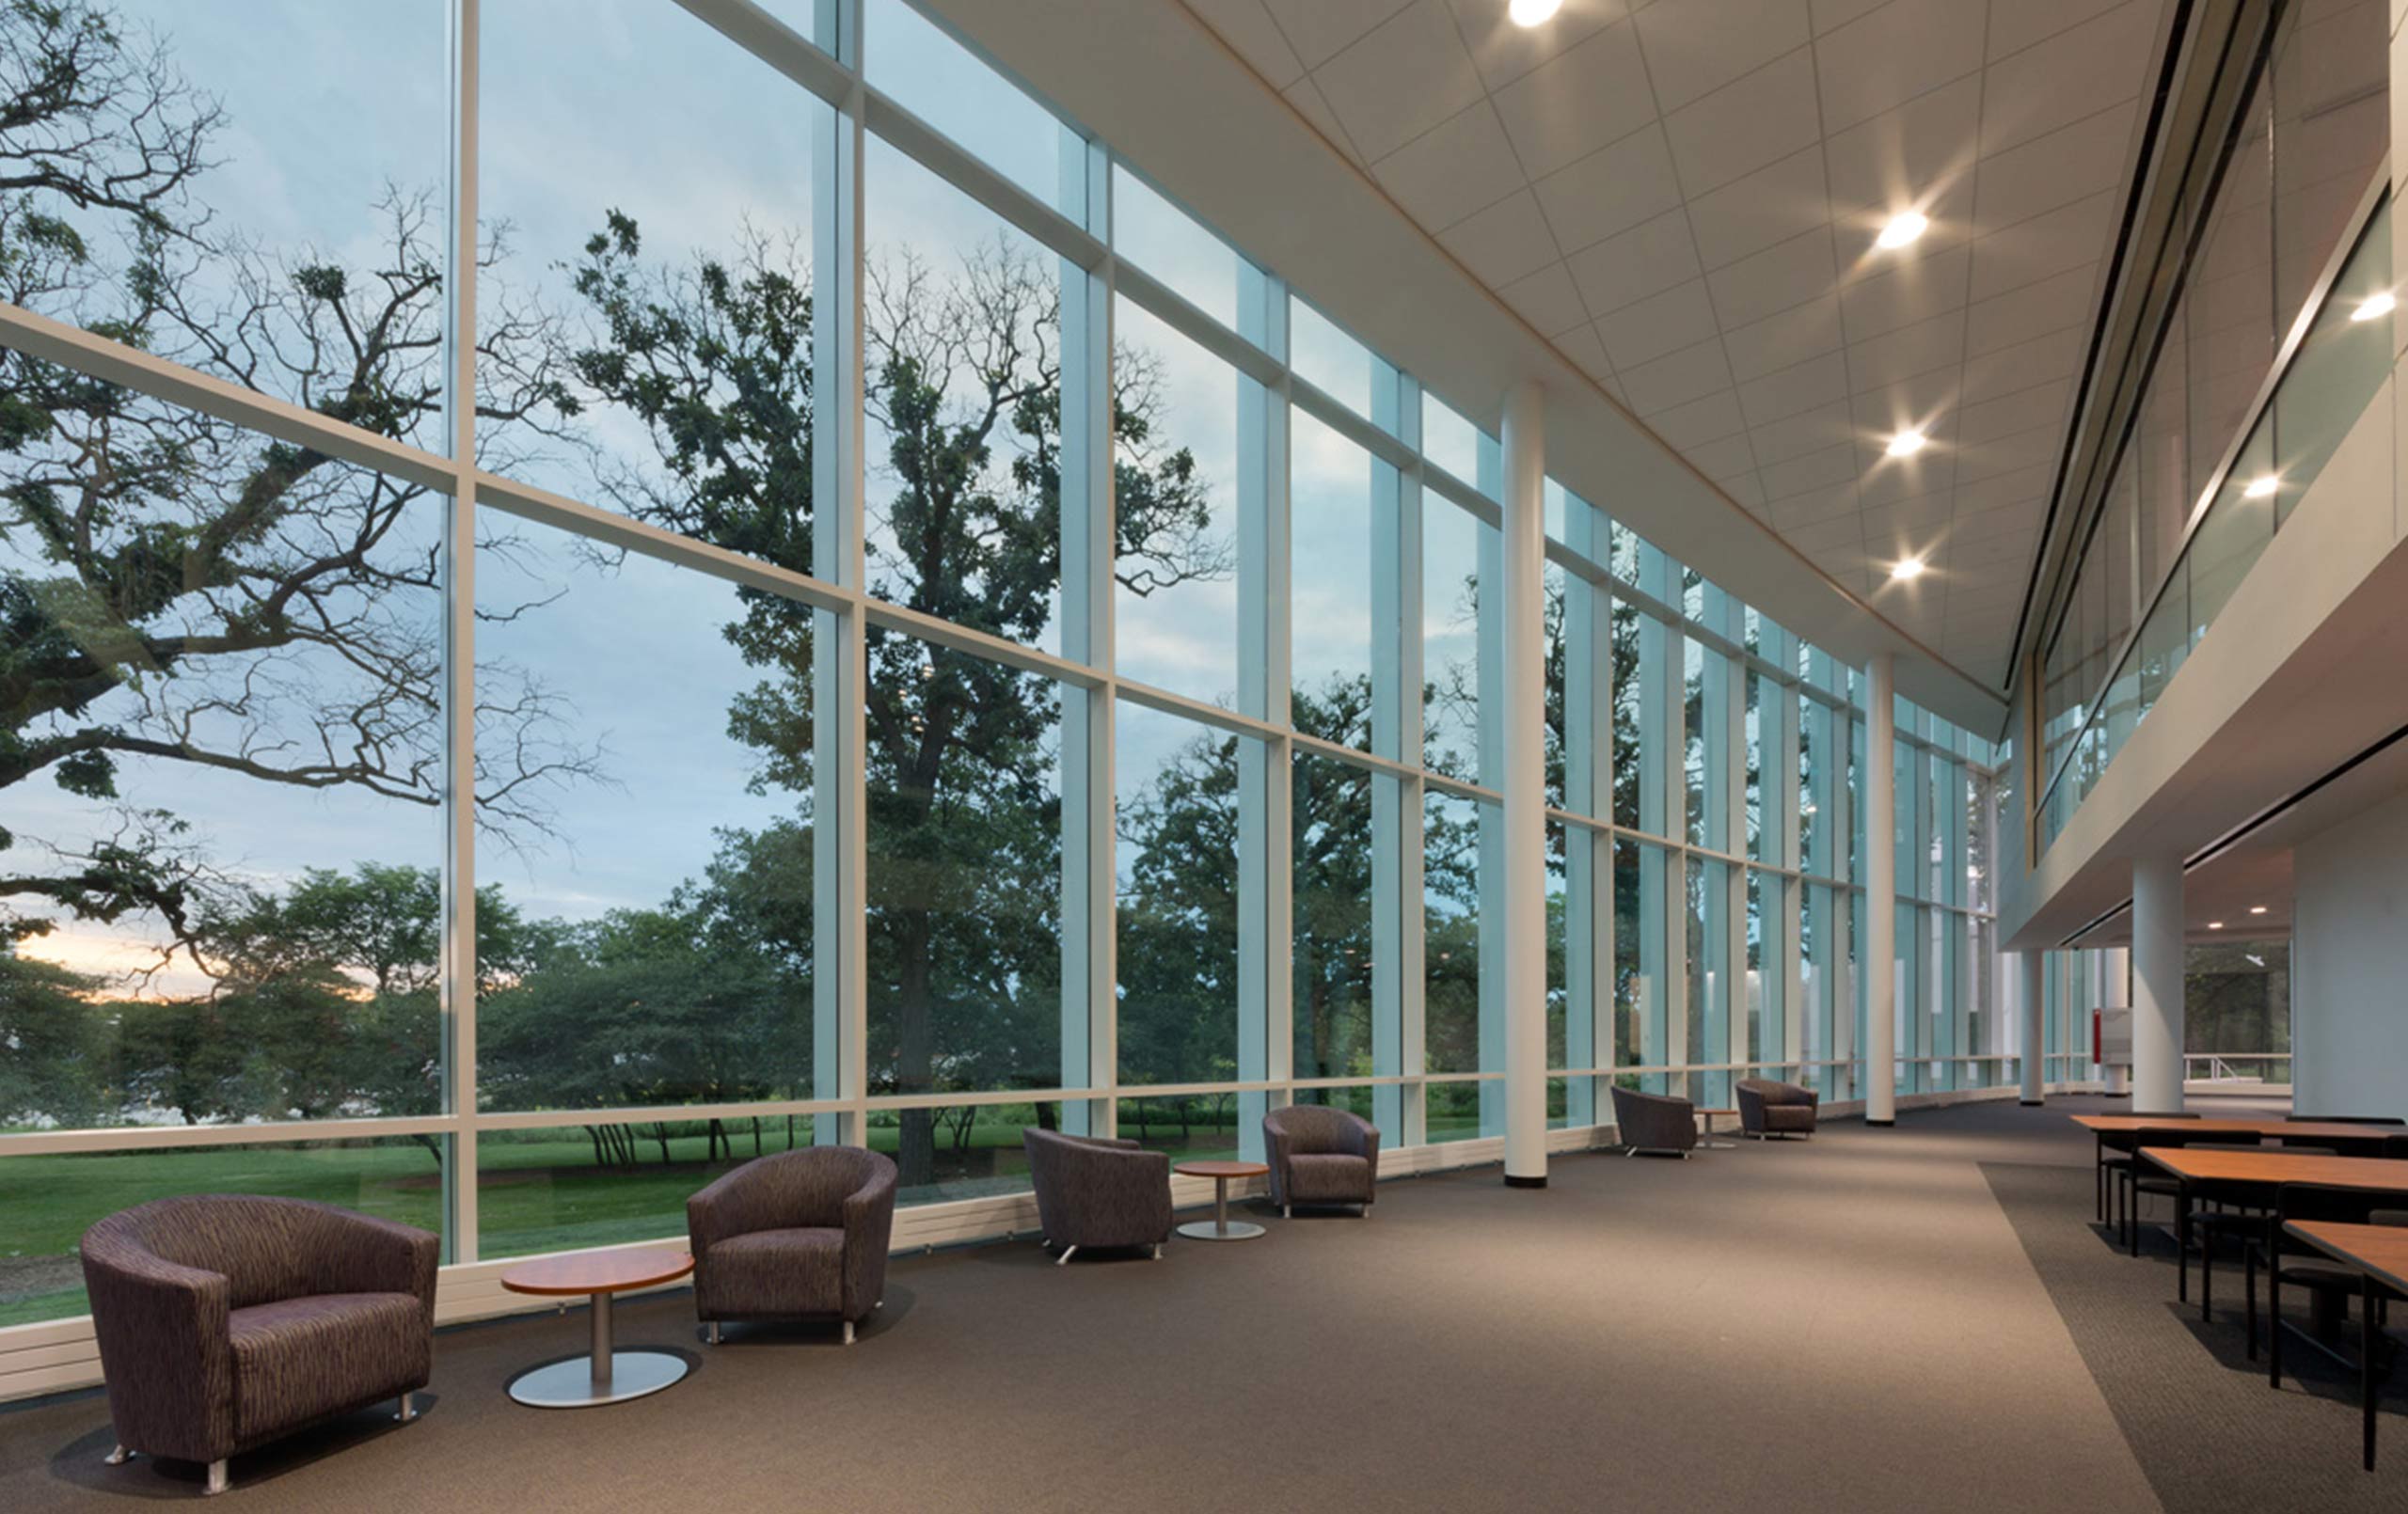 College corridor with tall windows displaying trees